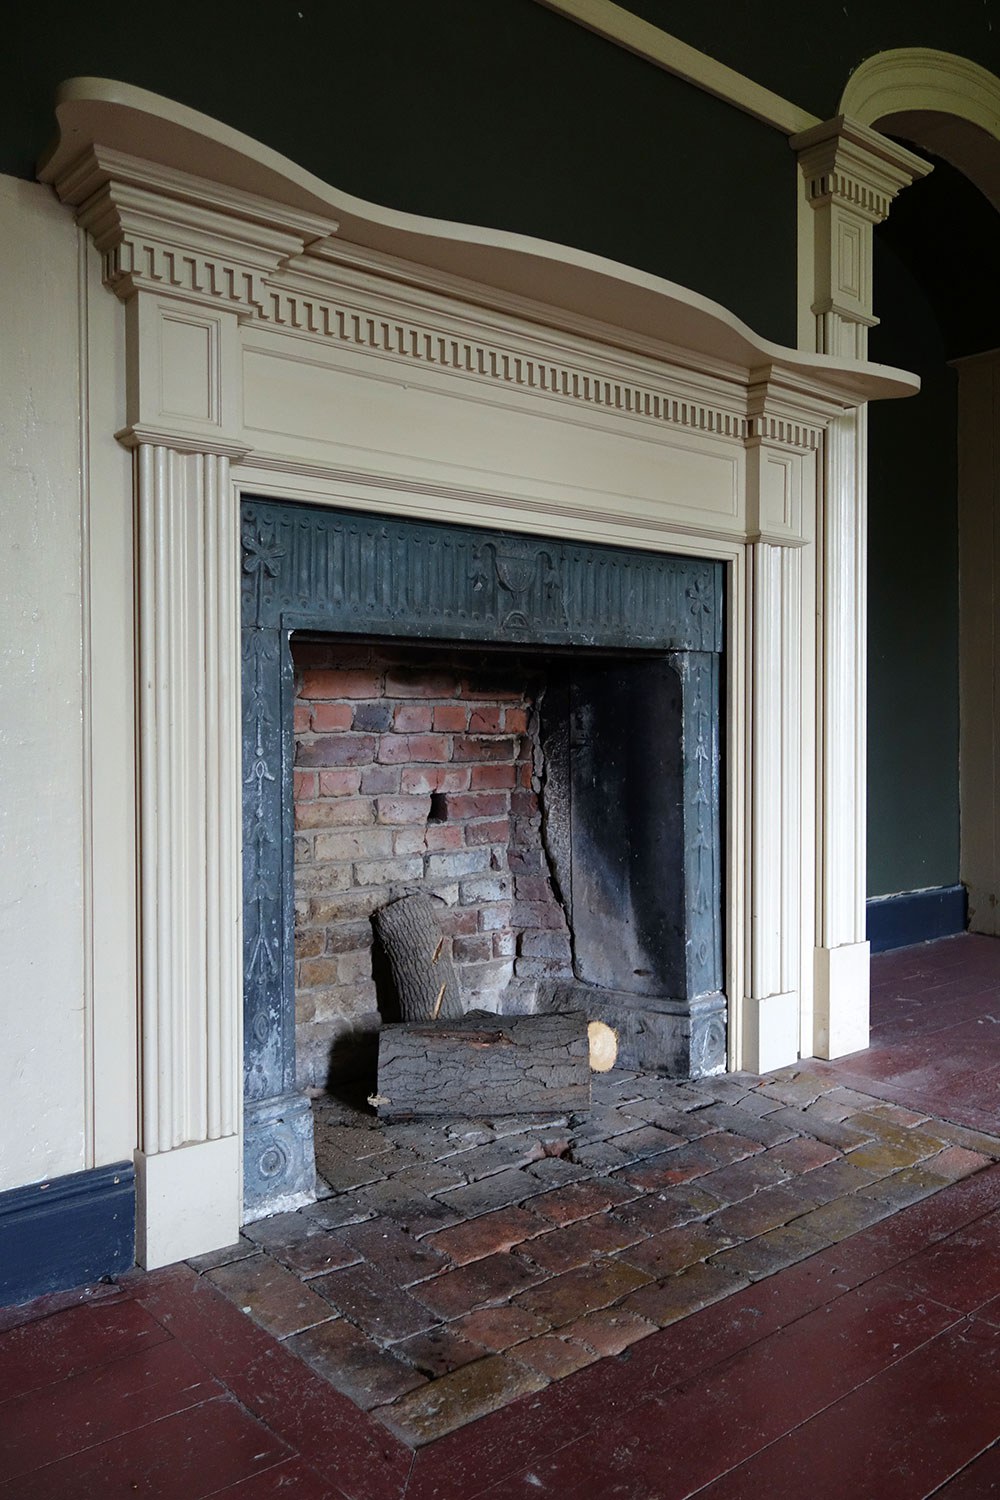 The restored drawing room fireplace has an 1817-era brick hearth and carved stone surround with reproduction painted wood mantel.